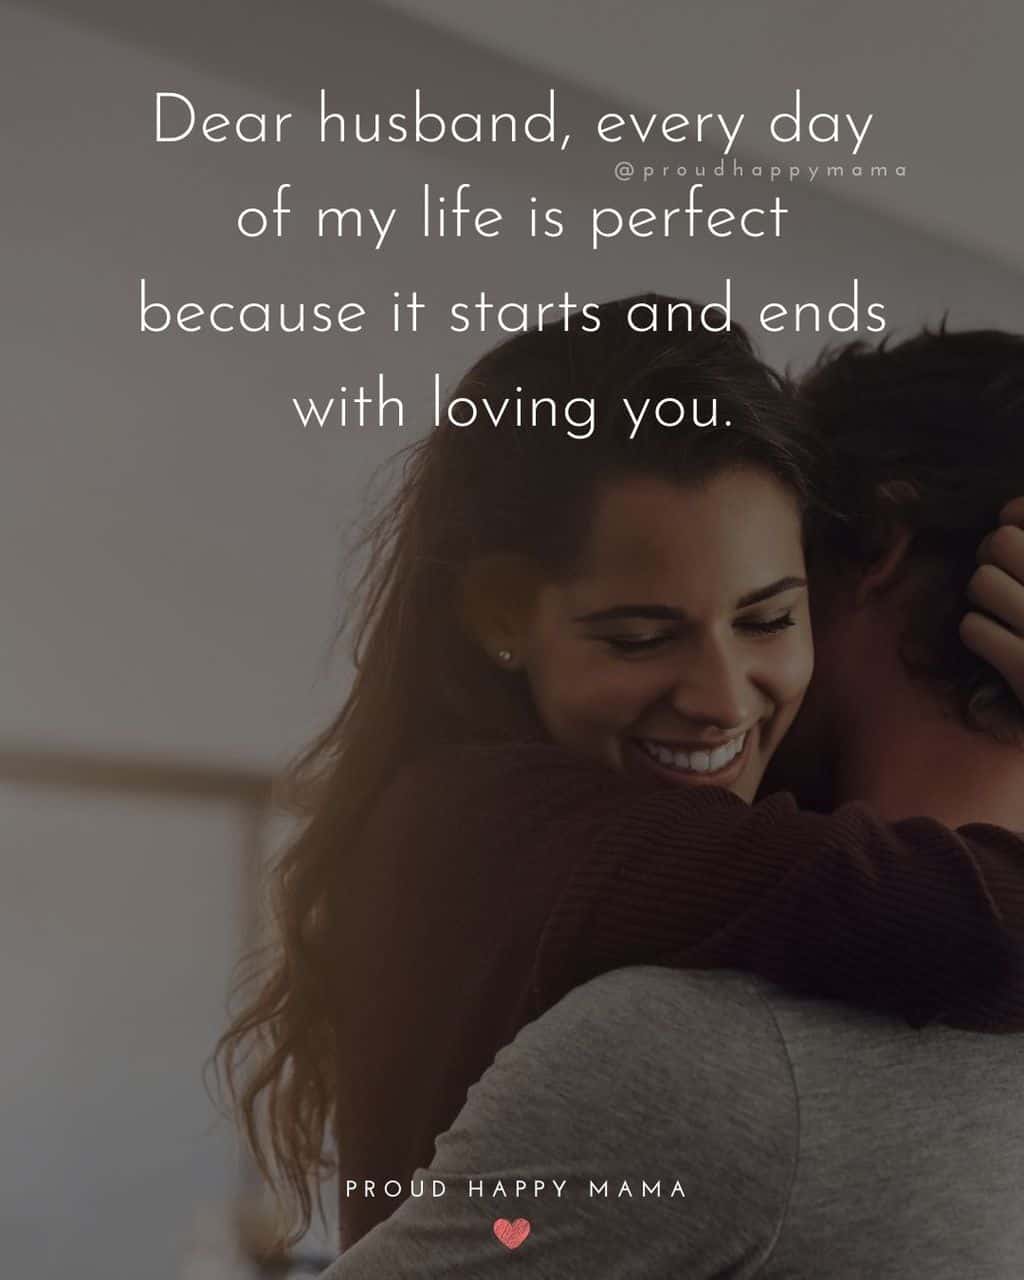 Husband Quotes - Dear husband, every day of my life is perfect because it starts and ends with loving you.